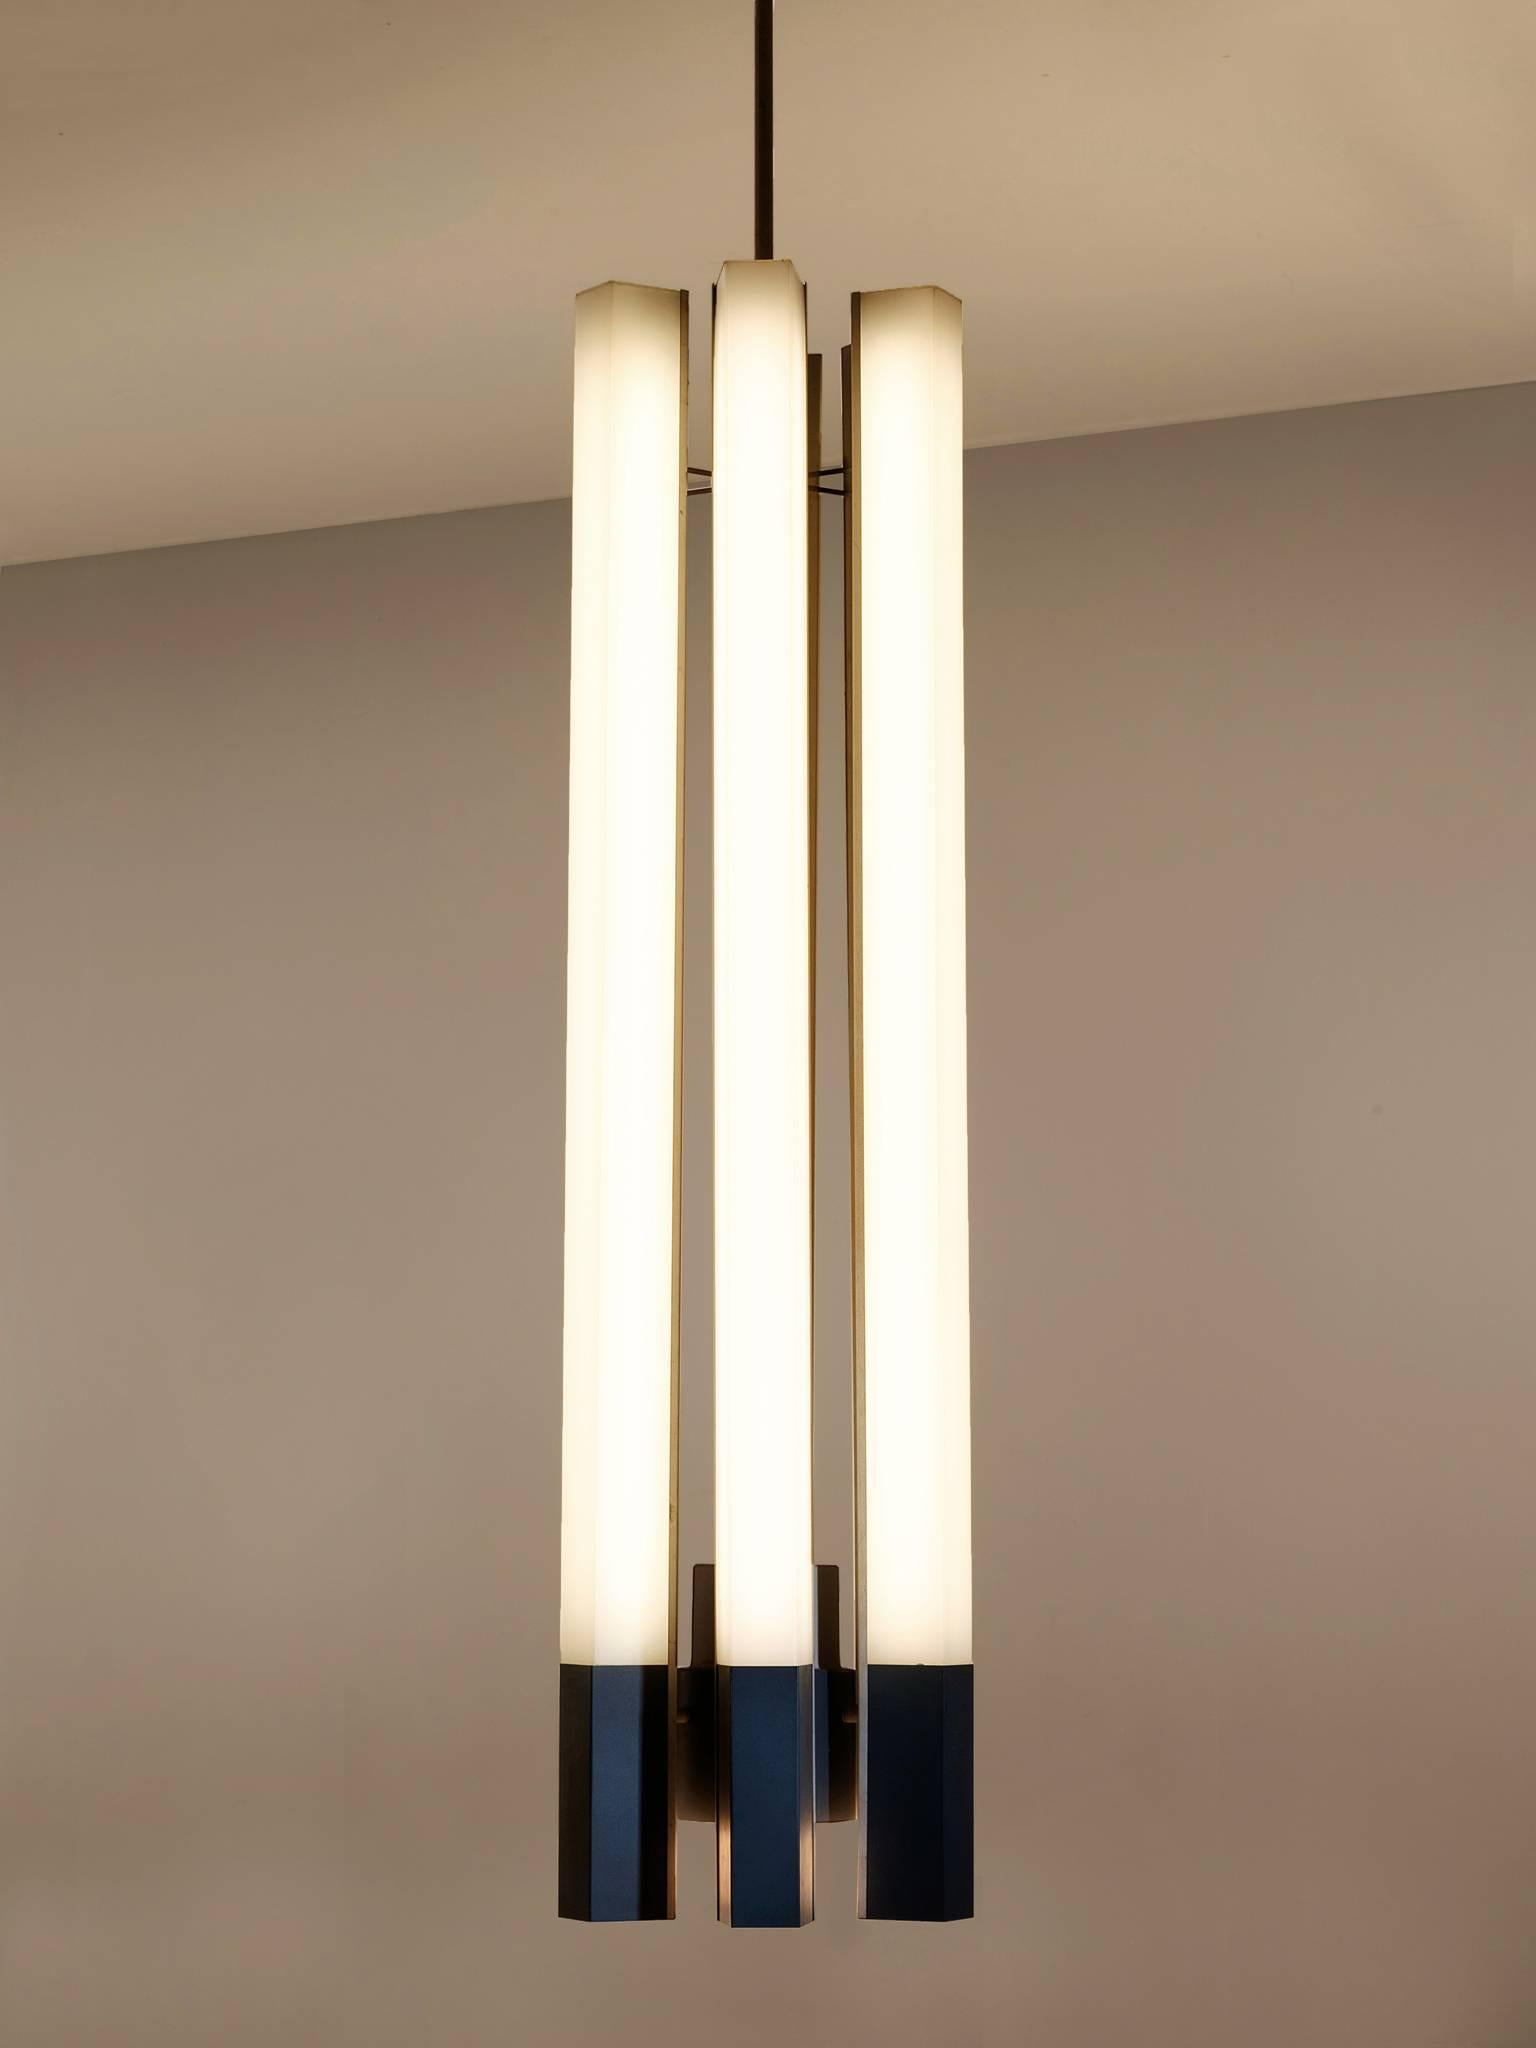 Chandelier, in metal and Lucite, Germany, 1970s. 

Very large fluorescent tube chandeliers. These lights have an interesting appearance each pendant consist of six fluorescent tube lights with a Lucite shade, captured in a metal frame. The lights